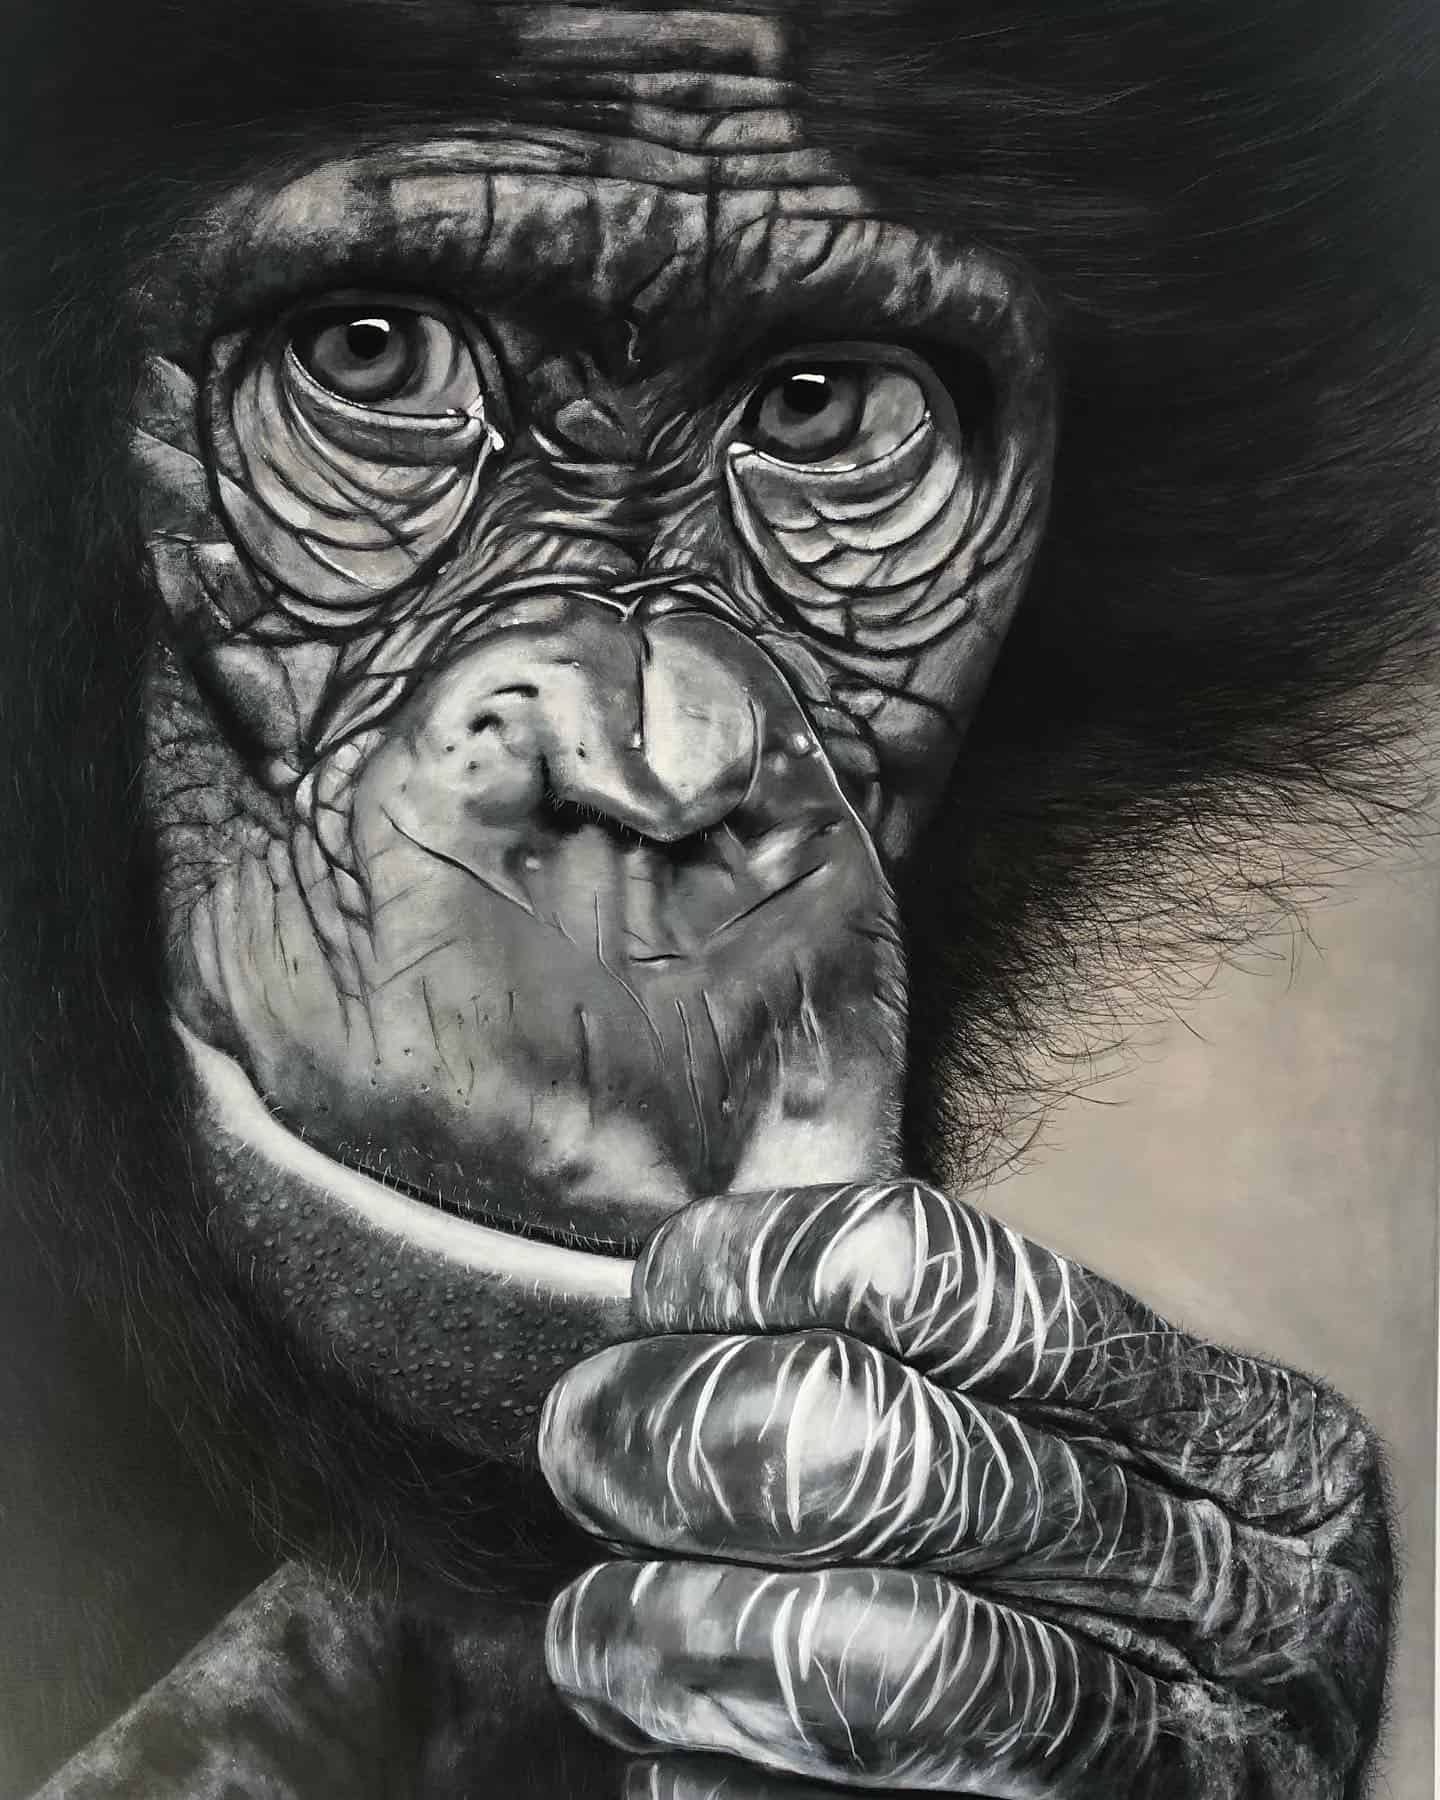 My new best friend ️The chimpanzee is our closest relative. Let's take care of them, and all other animal species too - and last but not least, each other......#artbyJSVJ #JSVJ #jannejohannessen #90x130 #chimpanzee #lookingforalovinghome #maleri #painting #kunst #art #artwork #acrylicpainting #akryl #portrait #contempoaryart #modernart #danishart #vægmaleri #vægkunst #interior #loveart